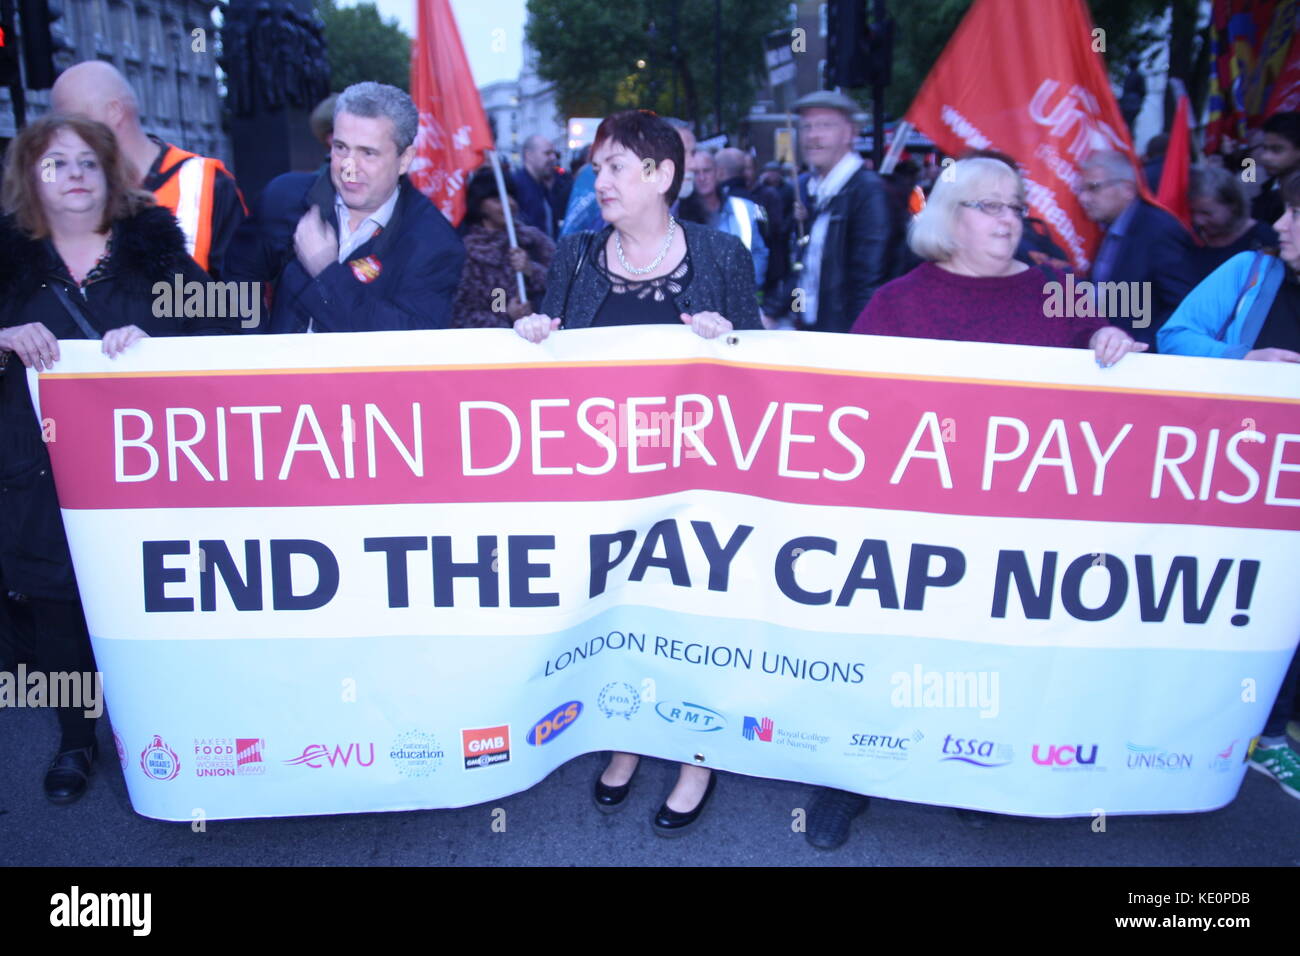 London, UK. 17th October 2017. The TUC holds a rally in Westminster to protest the 1% cap on payrises to government employees. Roland Ravenhill/Alamy Live News Stock Photo